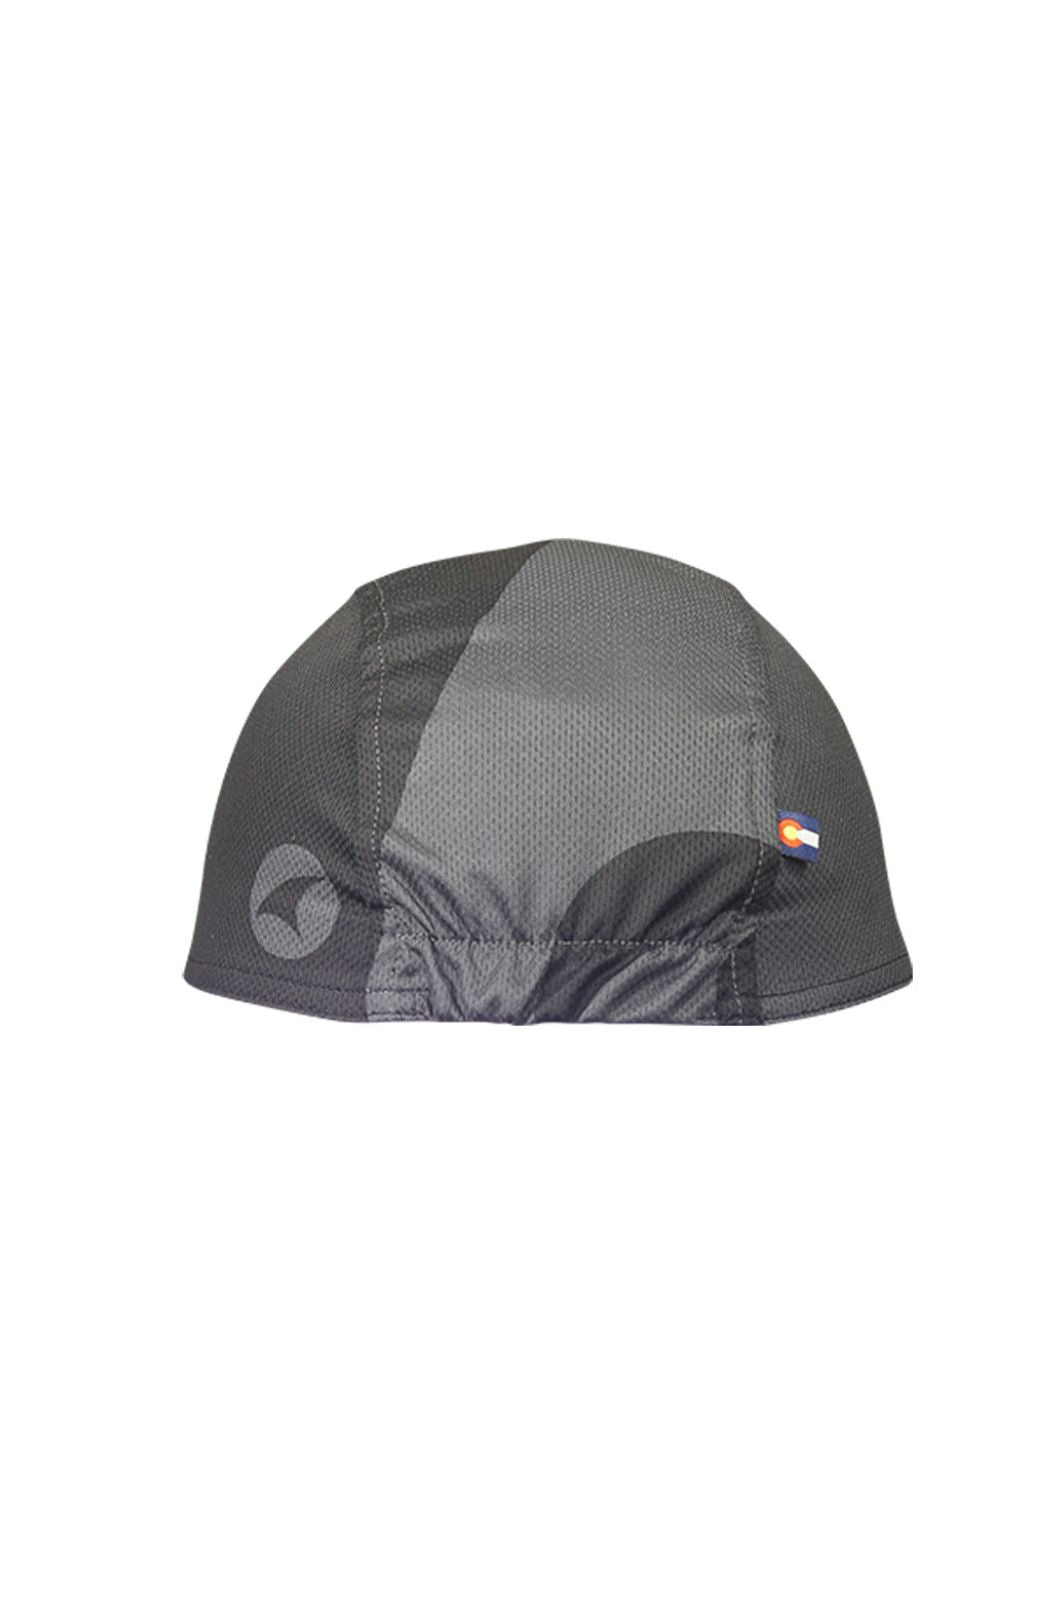 Charcoal Cycling Cap - Back View